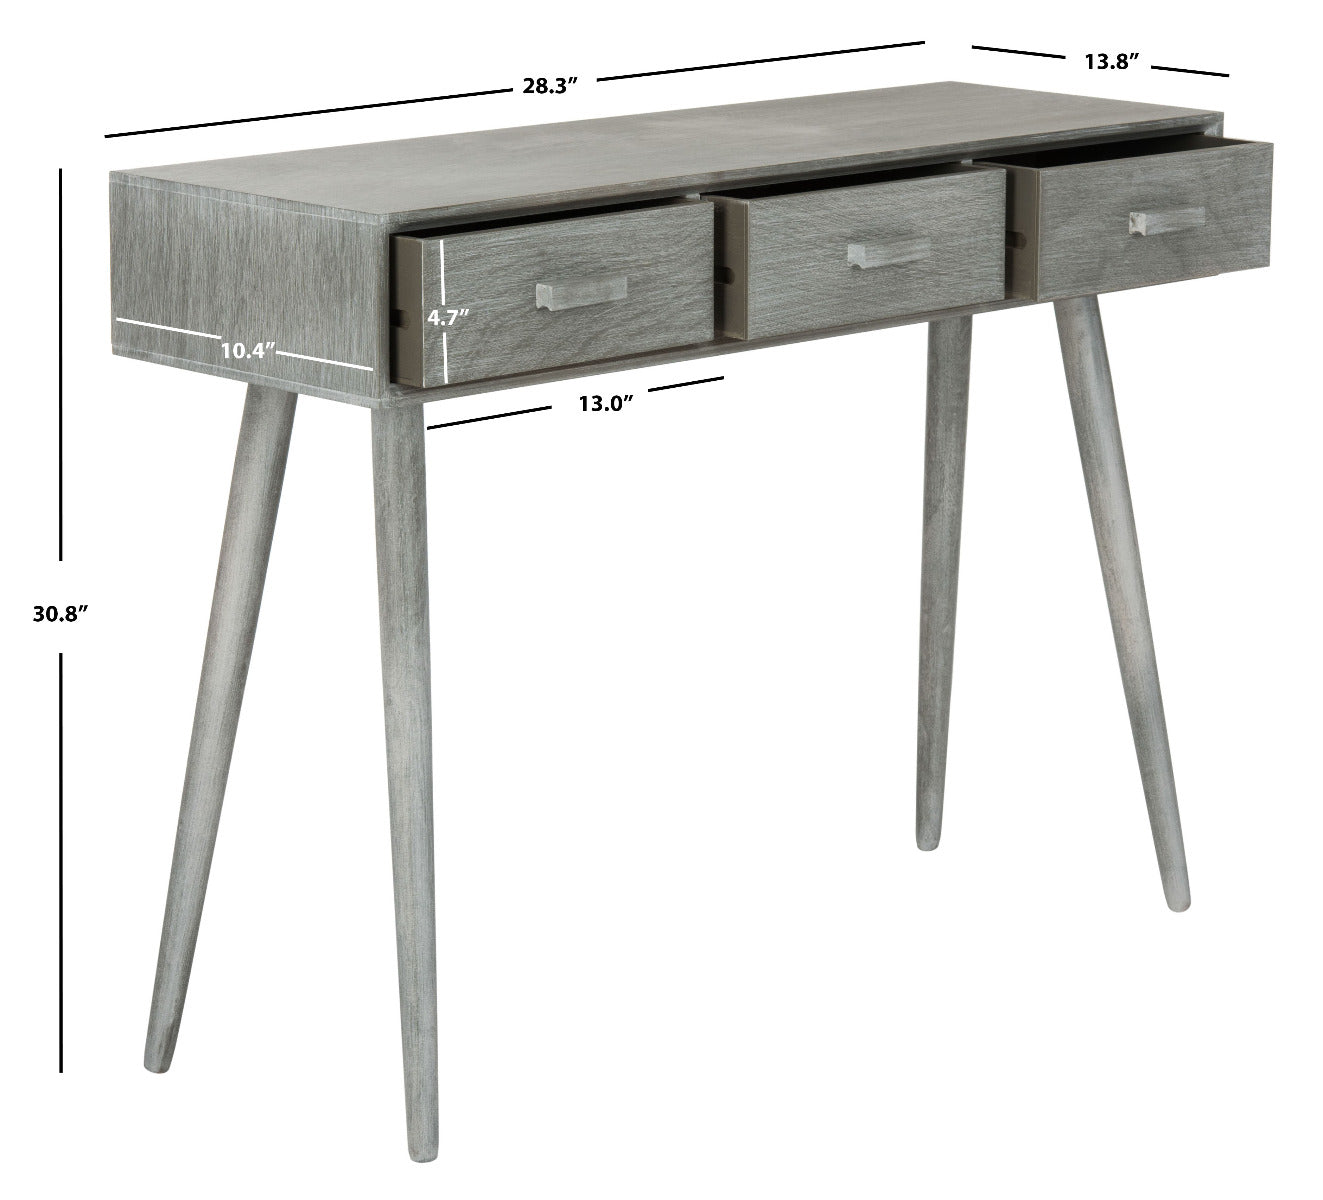 Safavieh Albus 3 Drawer Console Table , CNS5701 - Slate Grey